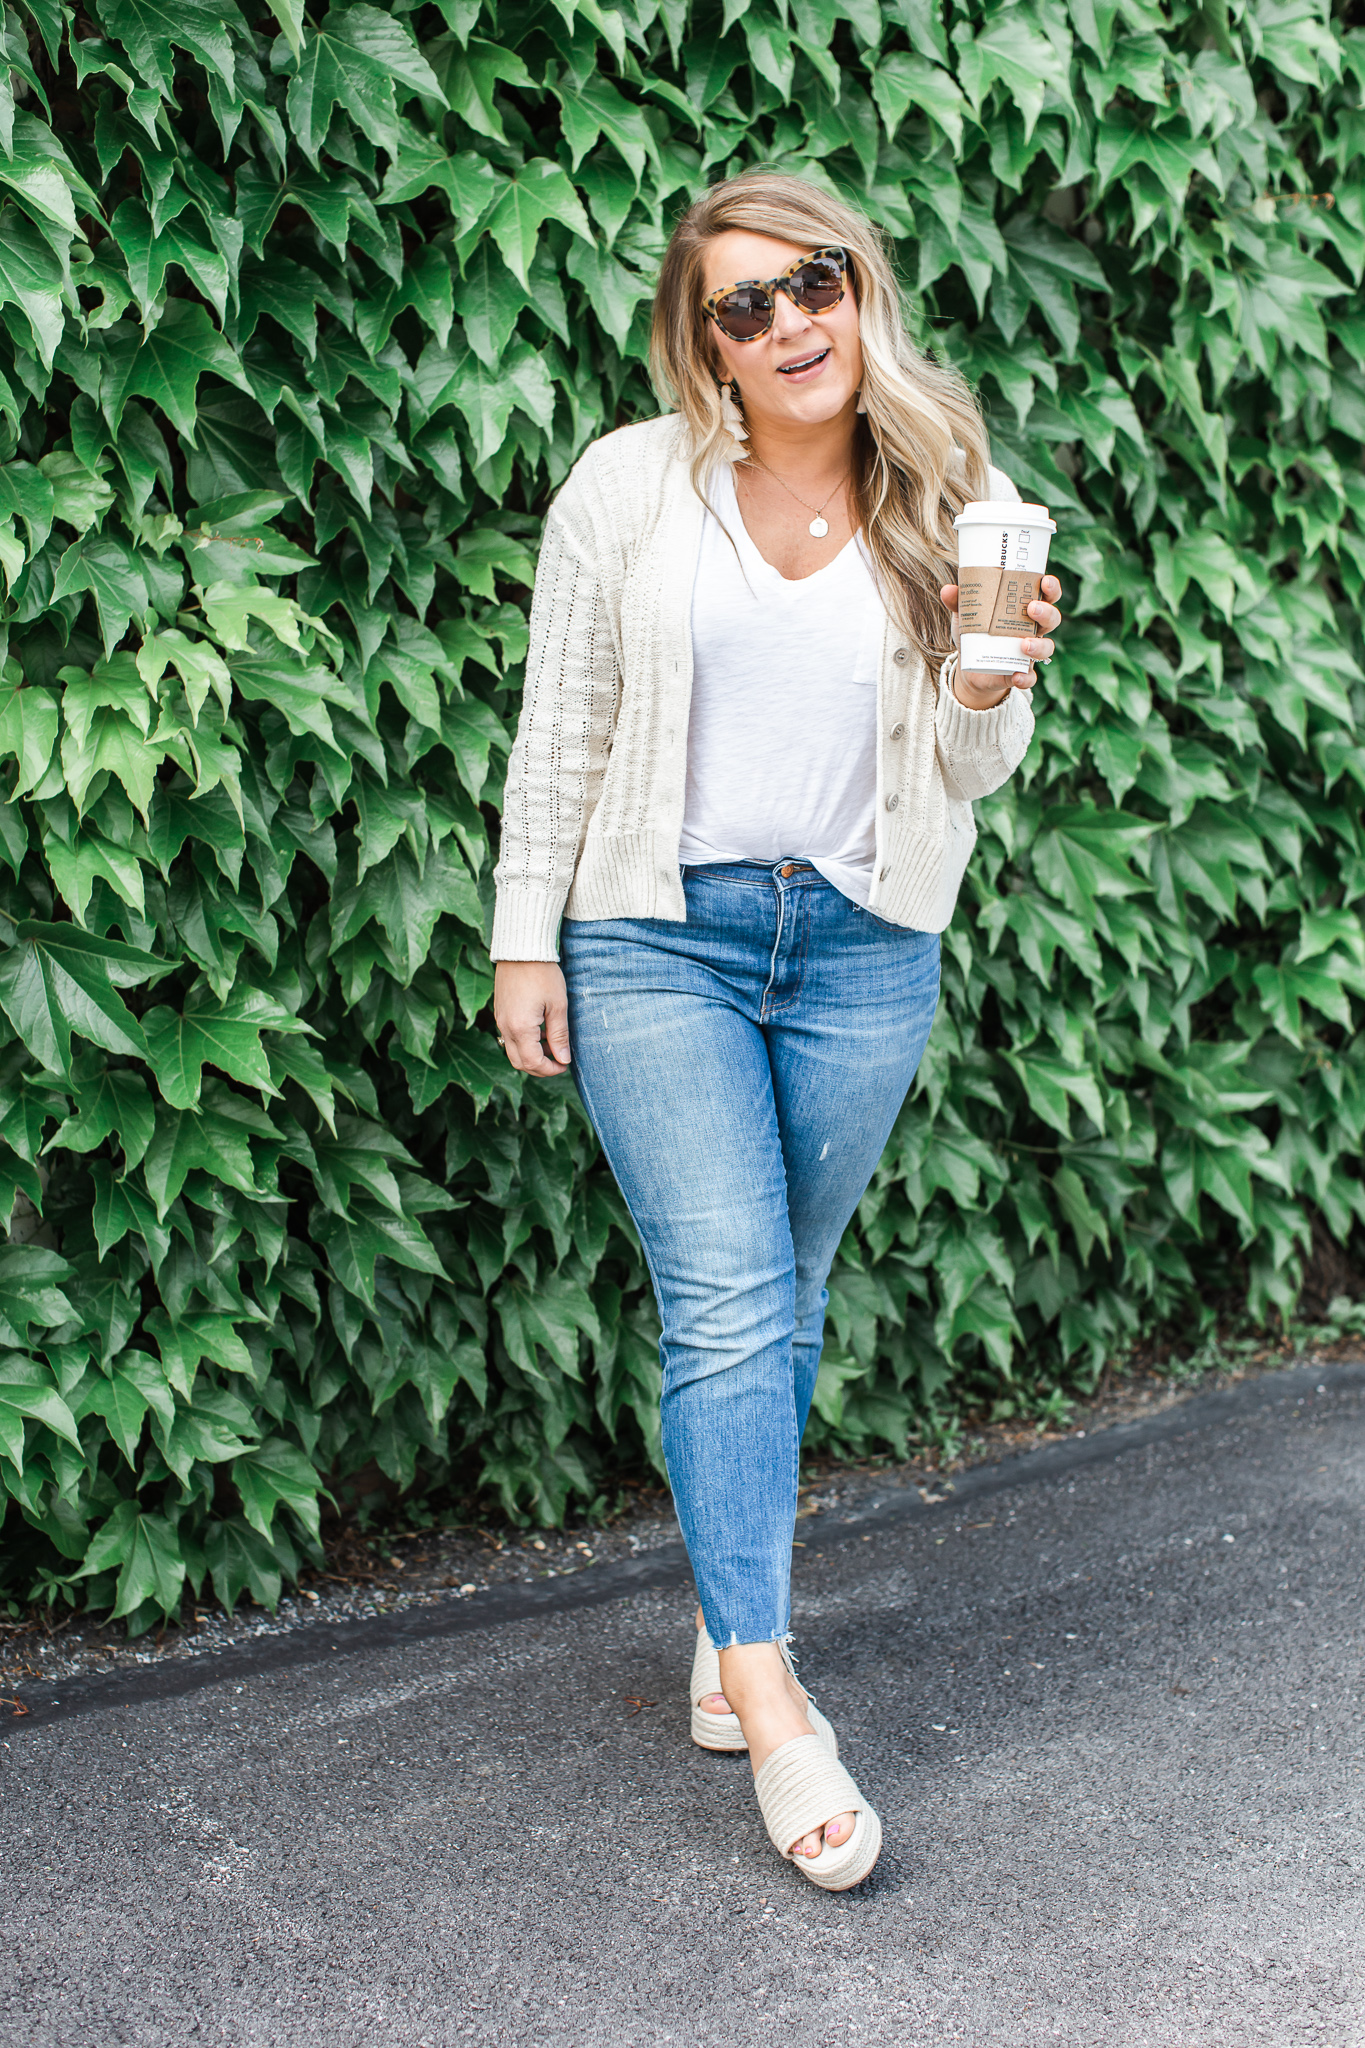 Summer Cardigan featured by top US fashion blog Coffee Beans and Bobby Pins; Image of a woman wearing J.Crew cardigan, Fidelity denim and Madewell white tee.